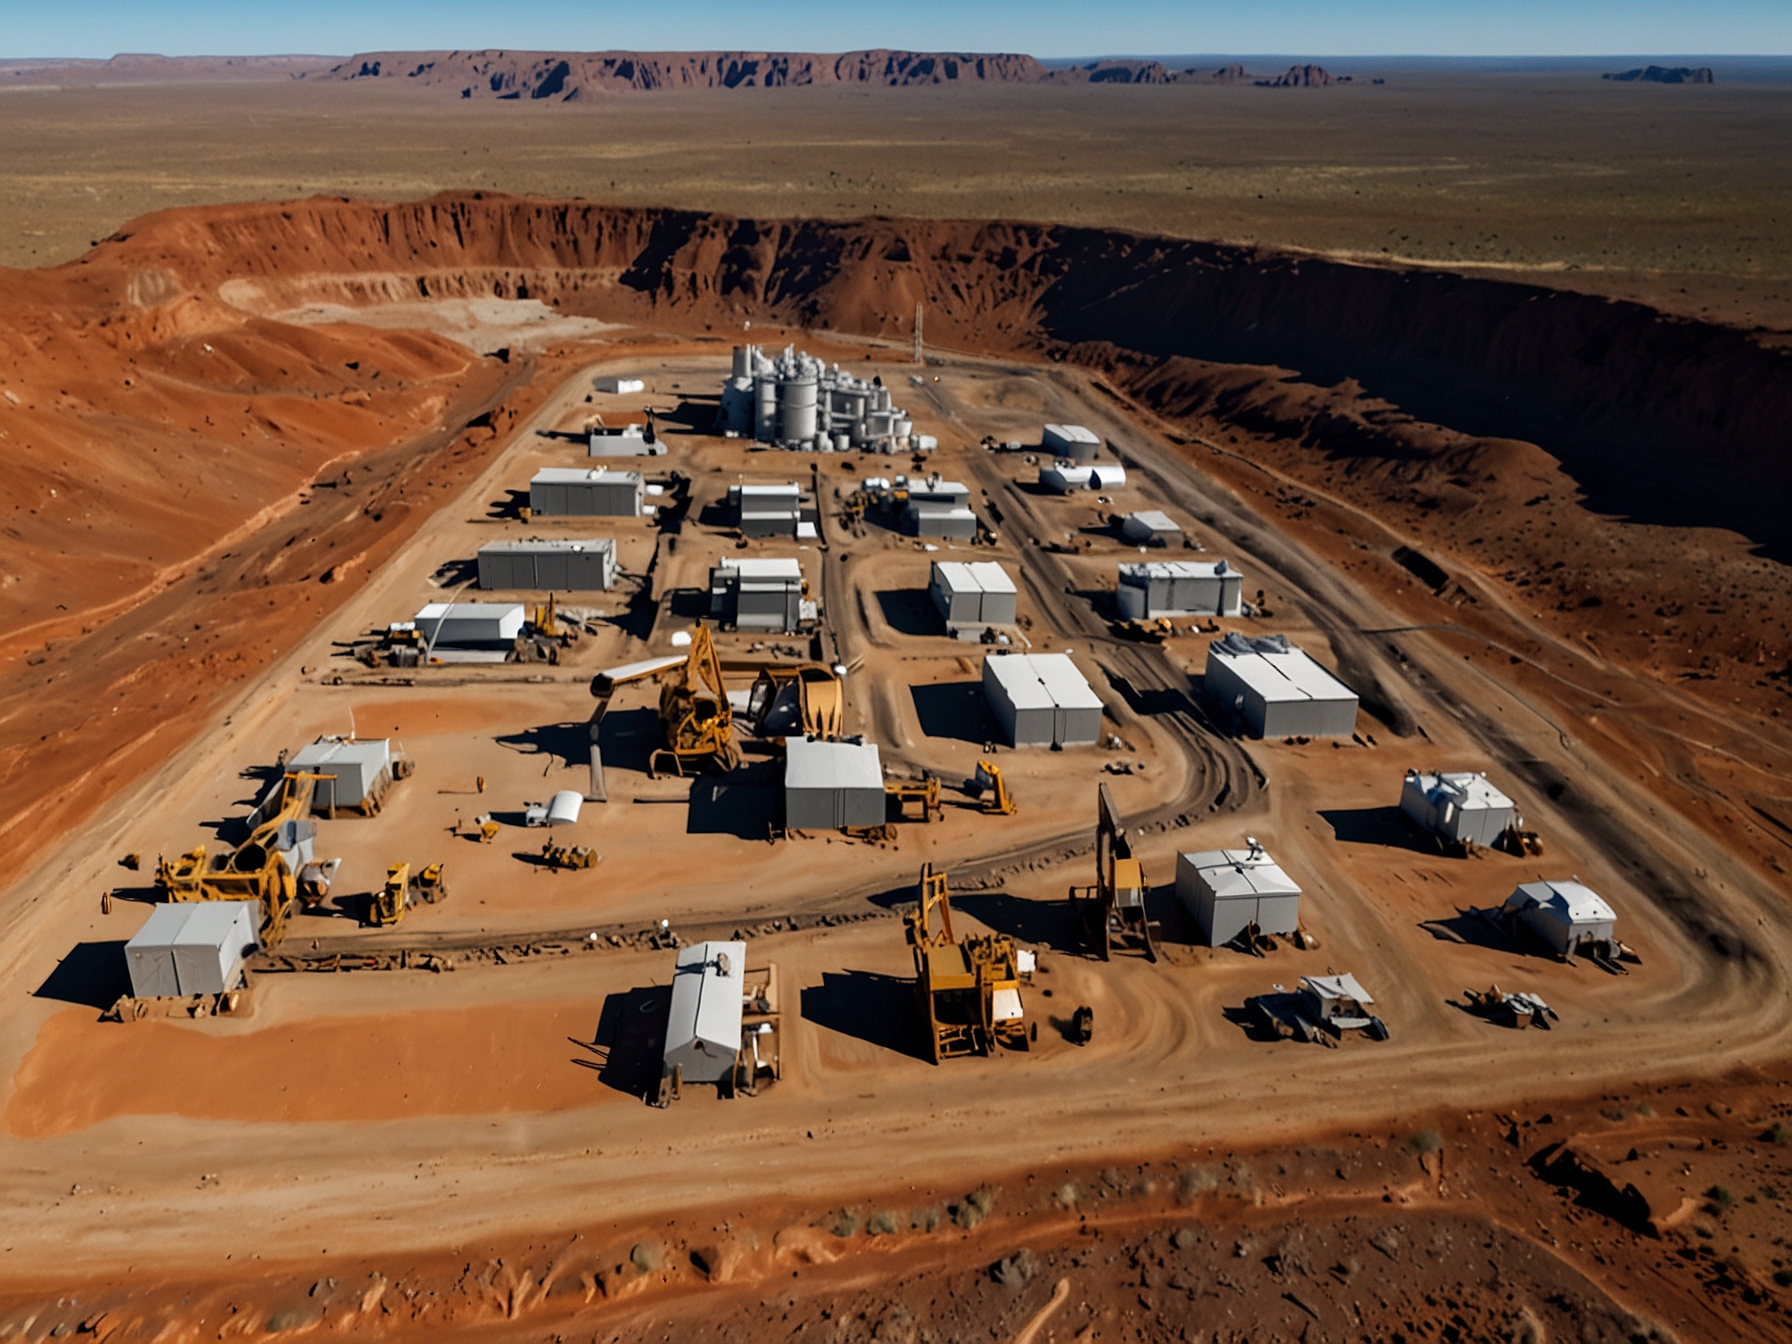 A wide view of the Pilgangoora Lithium-Tantalum Project site, showcasing large mining equipment and open-pit operations in Western Australia's Pilbara region.